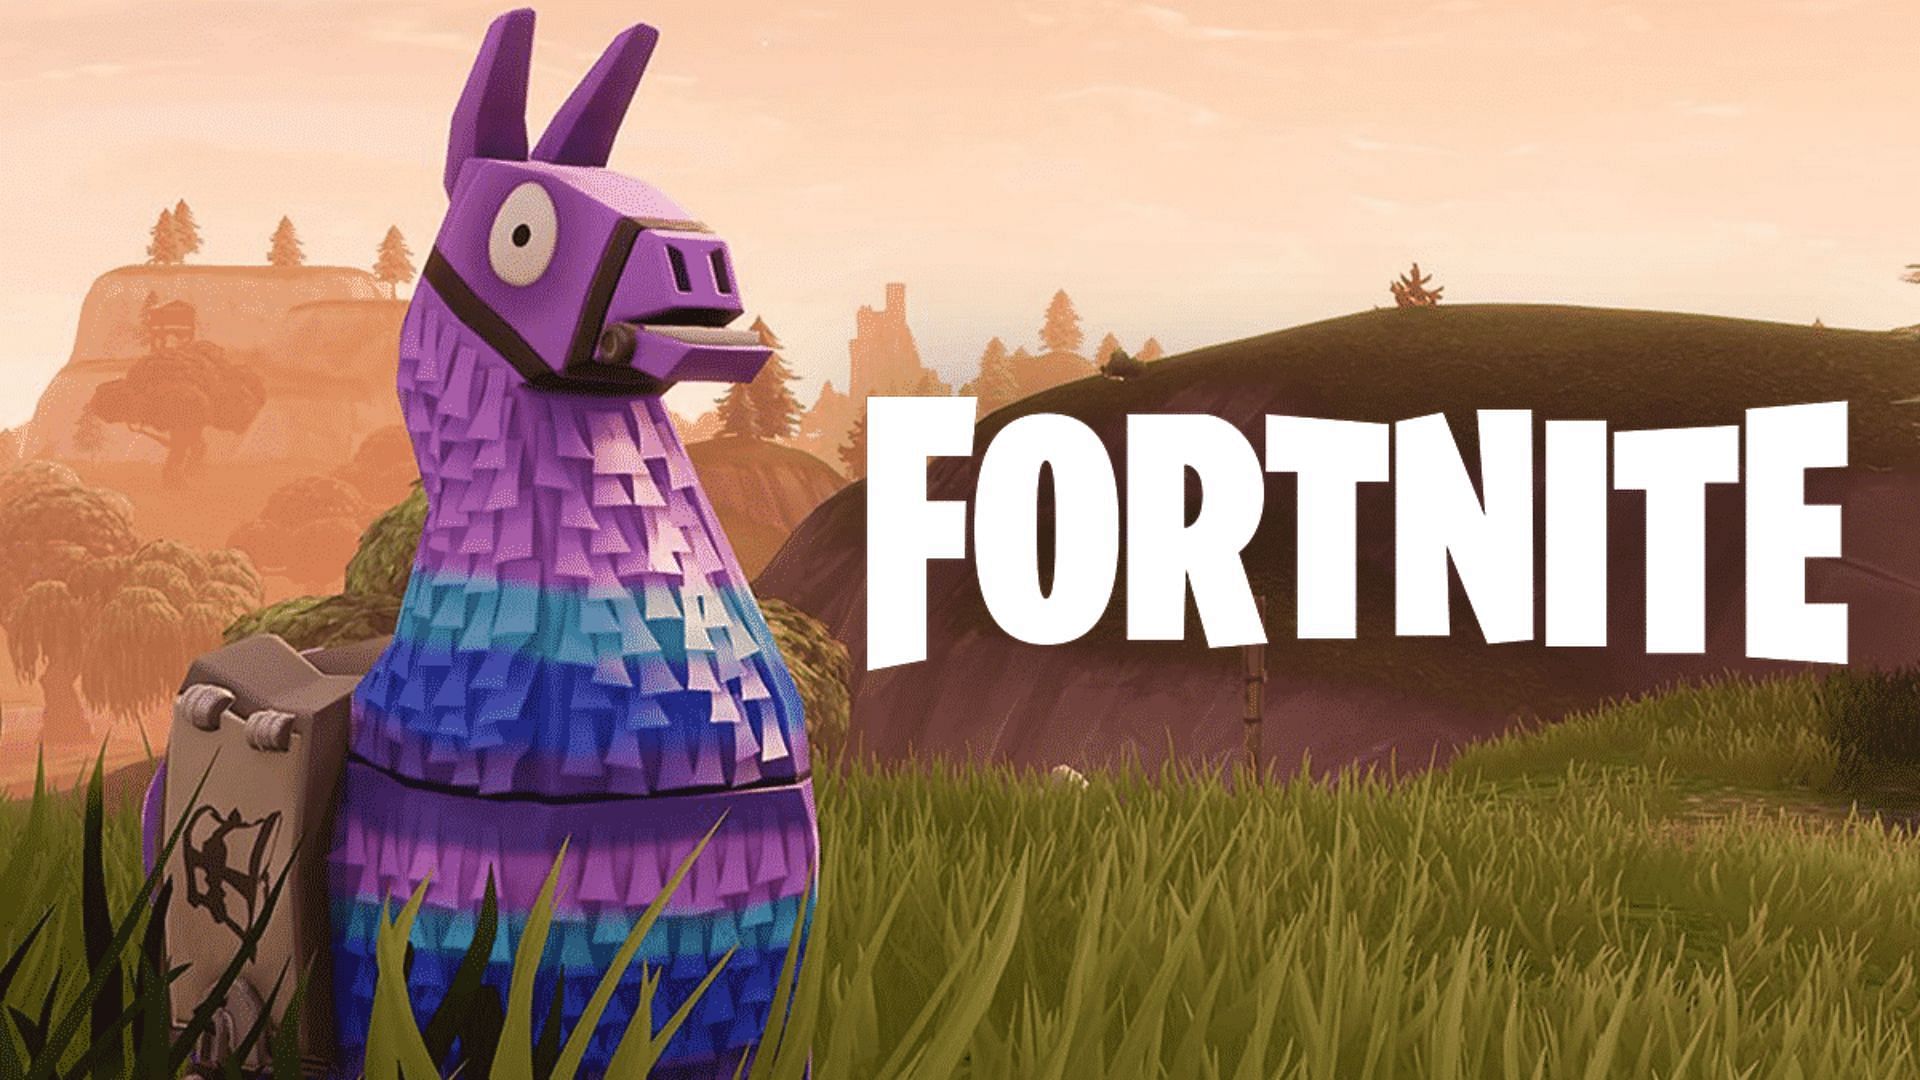 Llamas in Fortnite now spawn a Rift if not eliminated